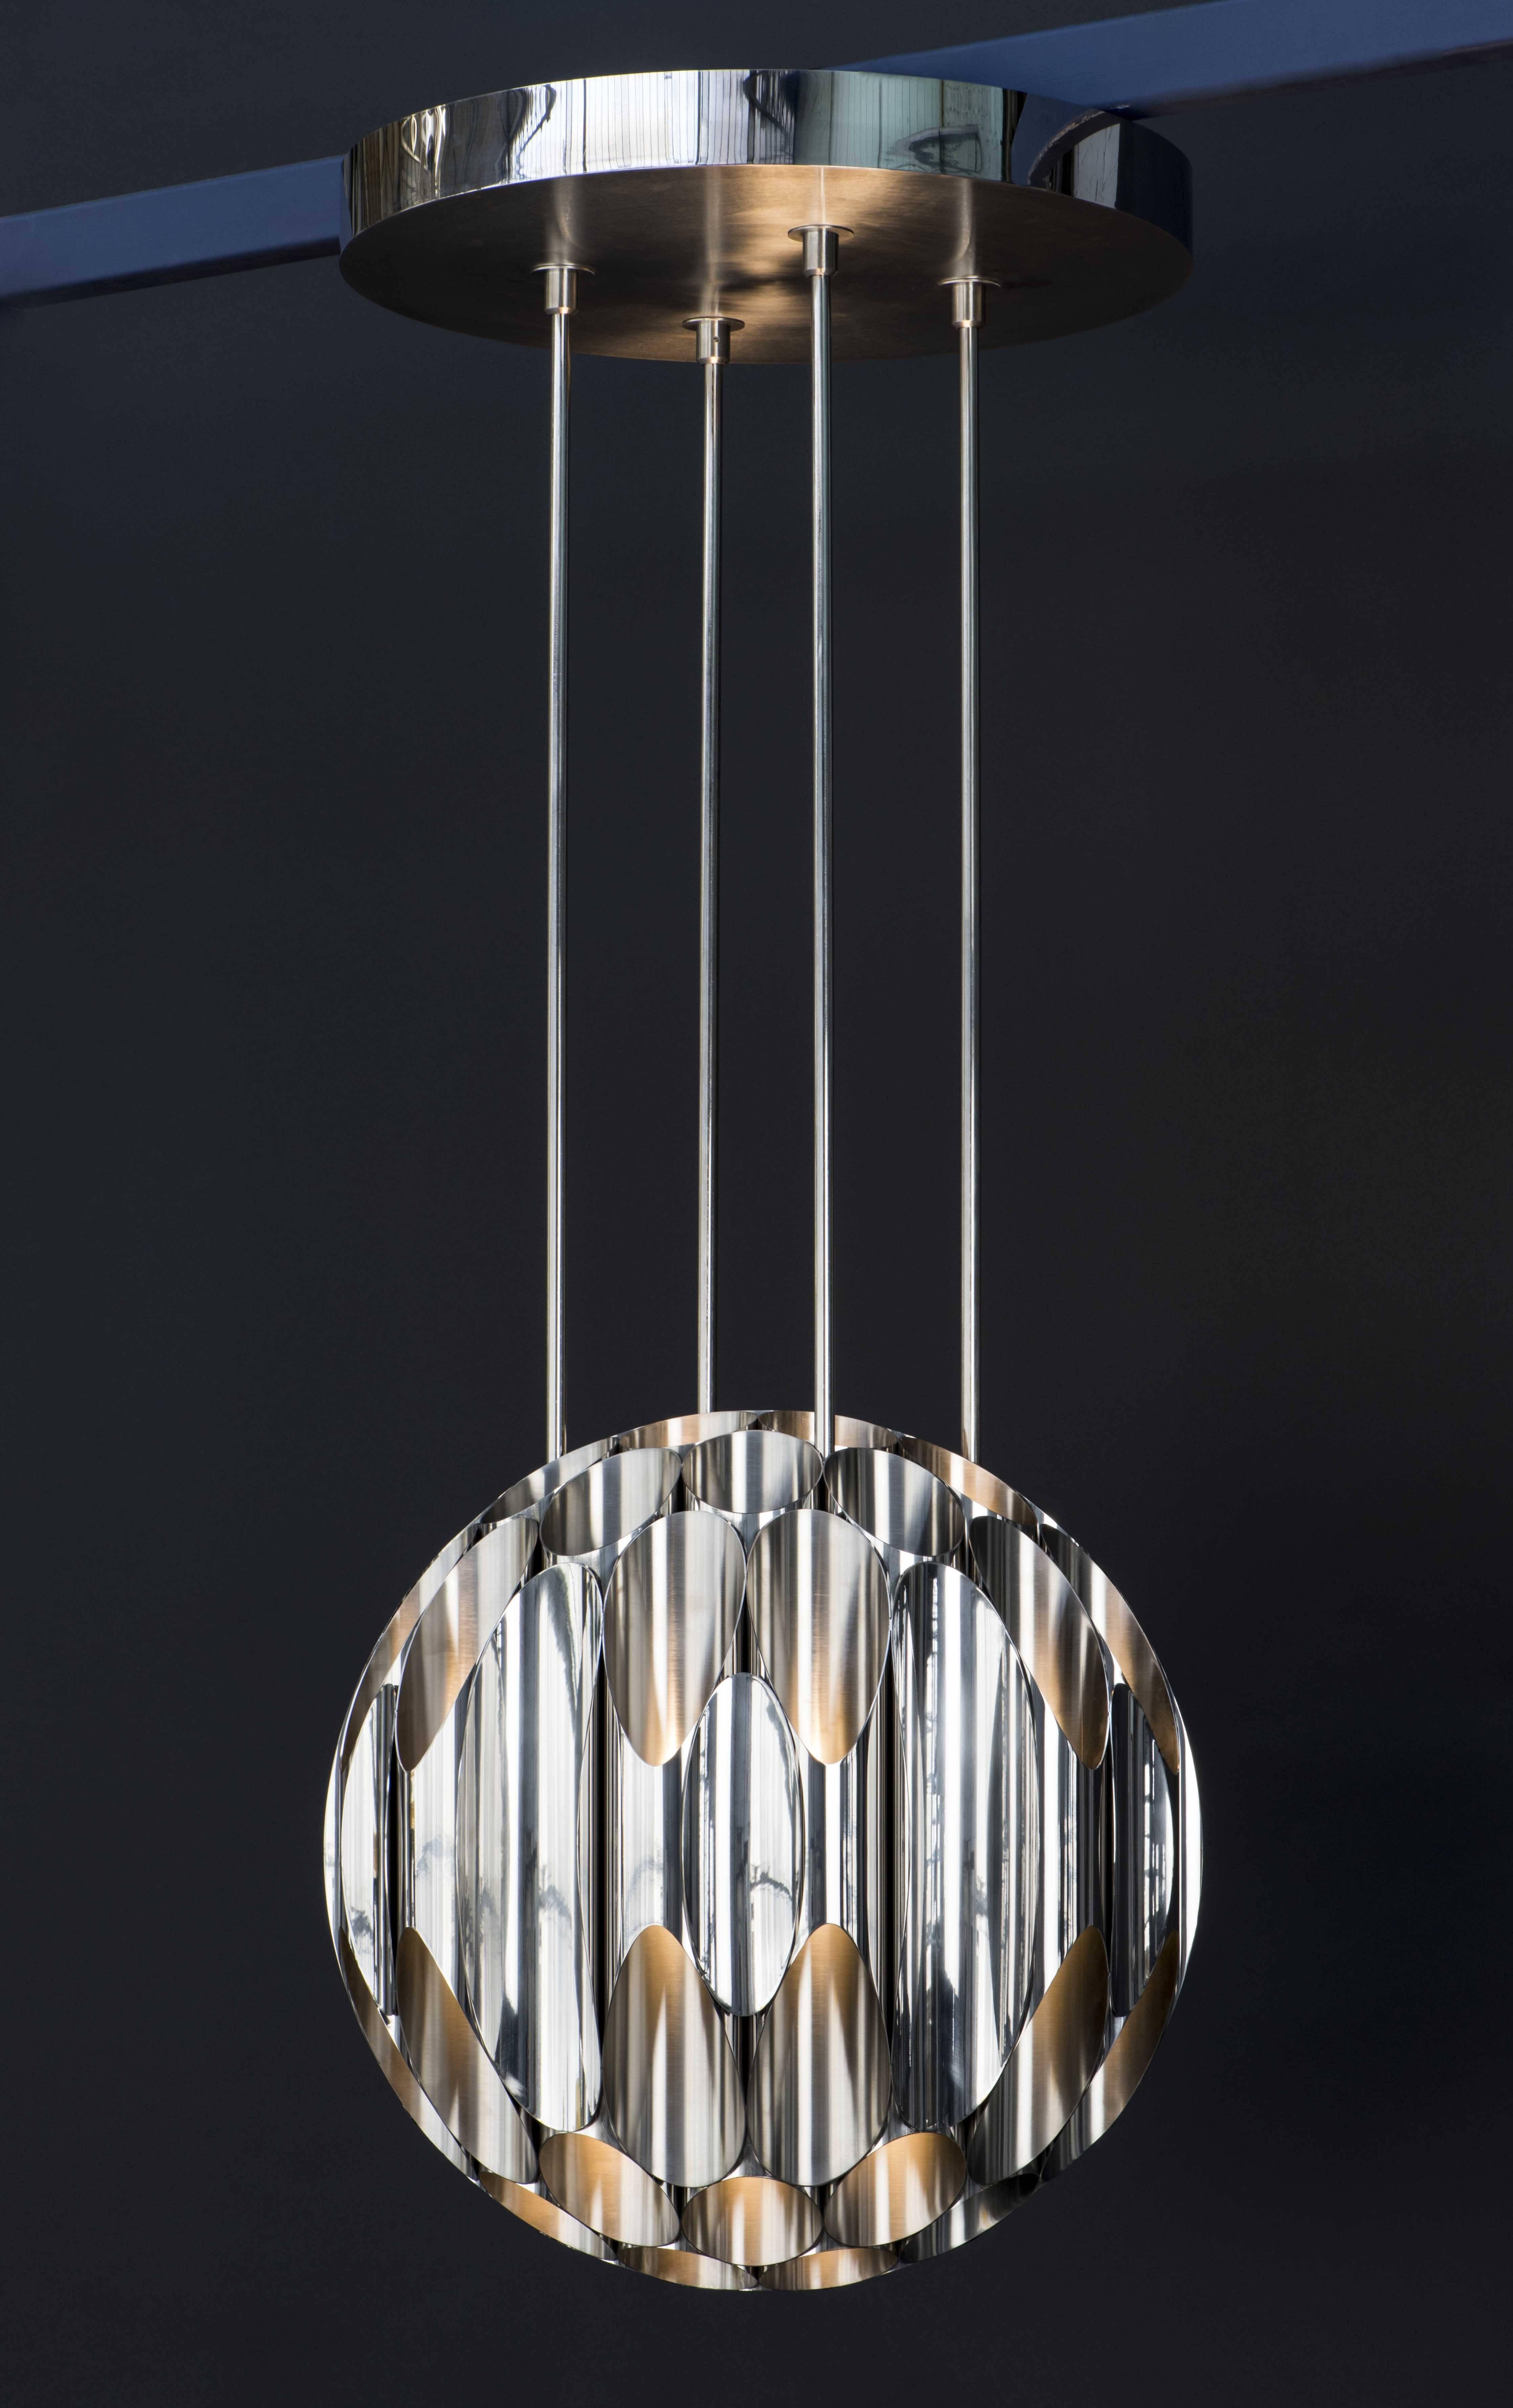 French Apollonius Chandelier, Made of Stainless Steel, Made in France by Charles Paris For Sale